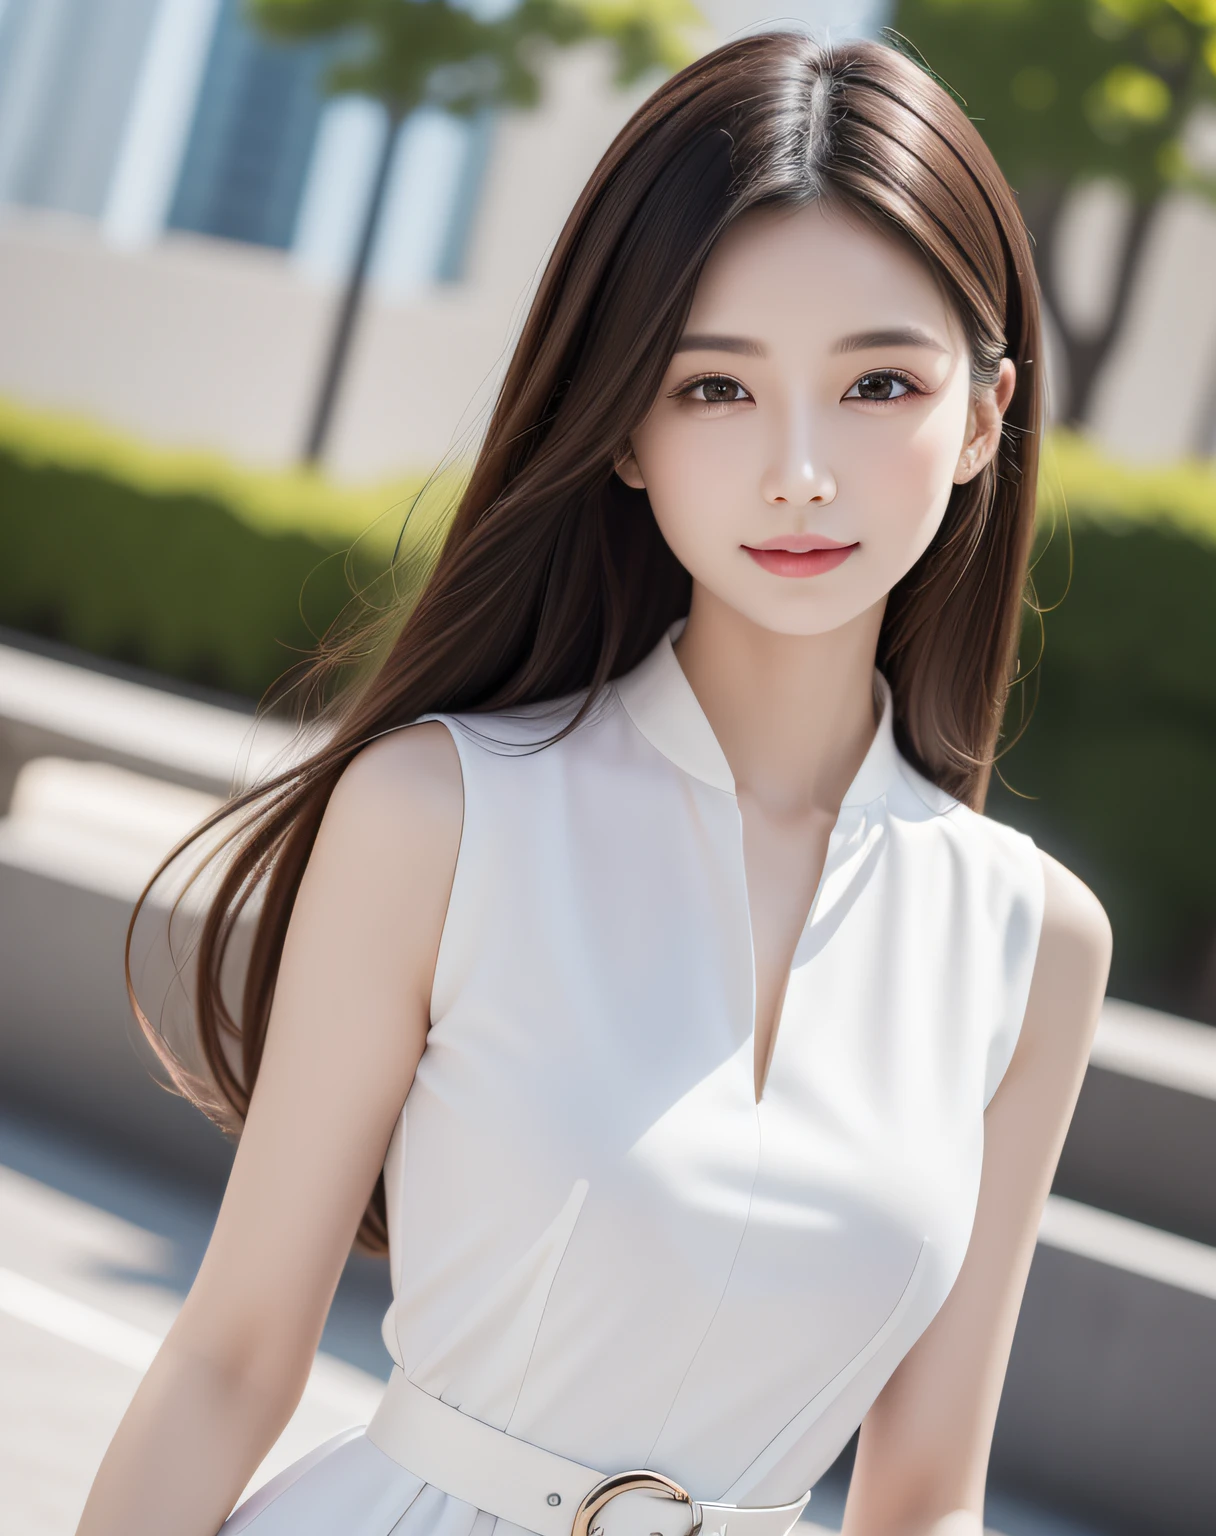 best quality, white skin, real human skin, (detailed face), oval face, pores, ultra high res, (8k, RAW photo, photorealistic:1.4), 1girl, slim, (looking straight at viewer with a serene and goddess-like happiness:1.2), ( lifter gloss, eyelashes, gloss-face, best quality, ultra highres, Broad lighting, natural shading), teacher style fashion, sleeveless, white fashion shirt one-piece dress, black rubber belt, cityscape,